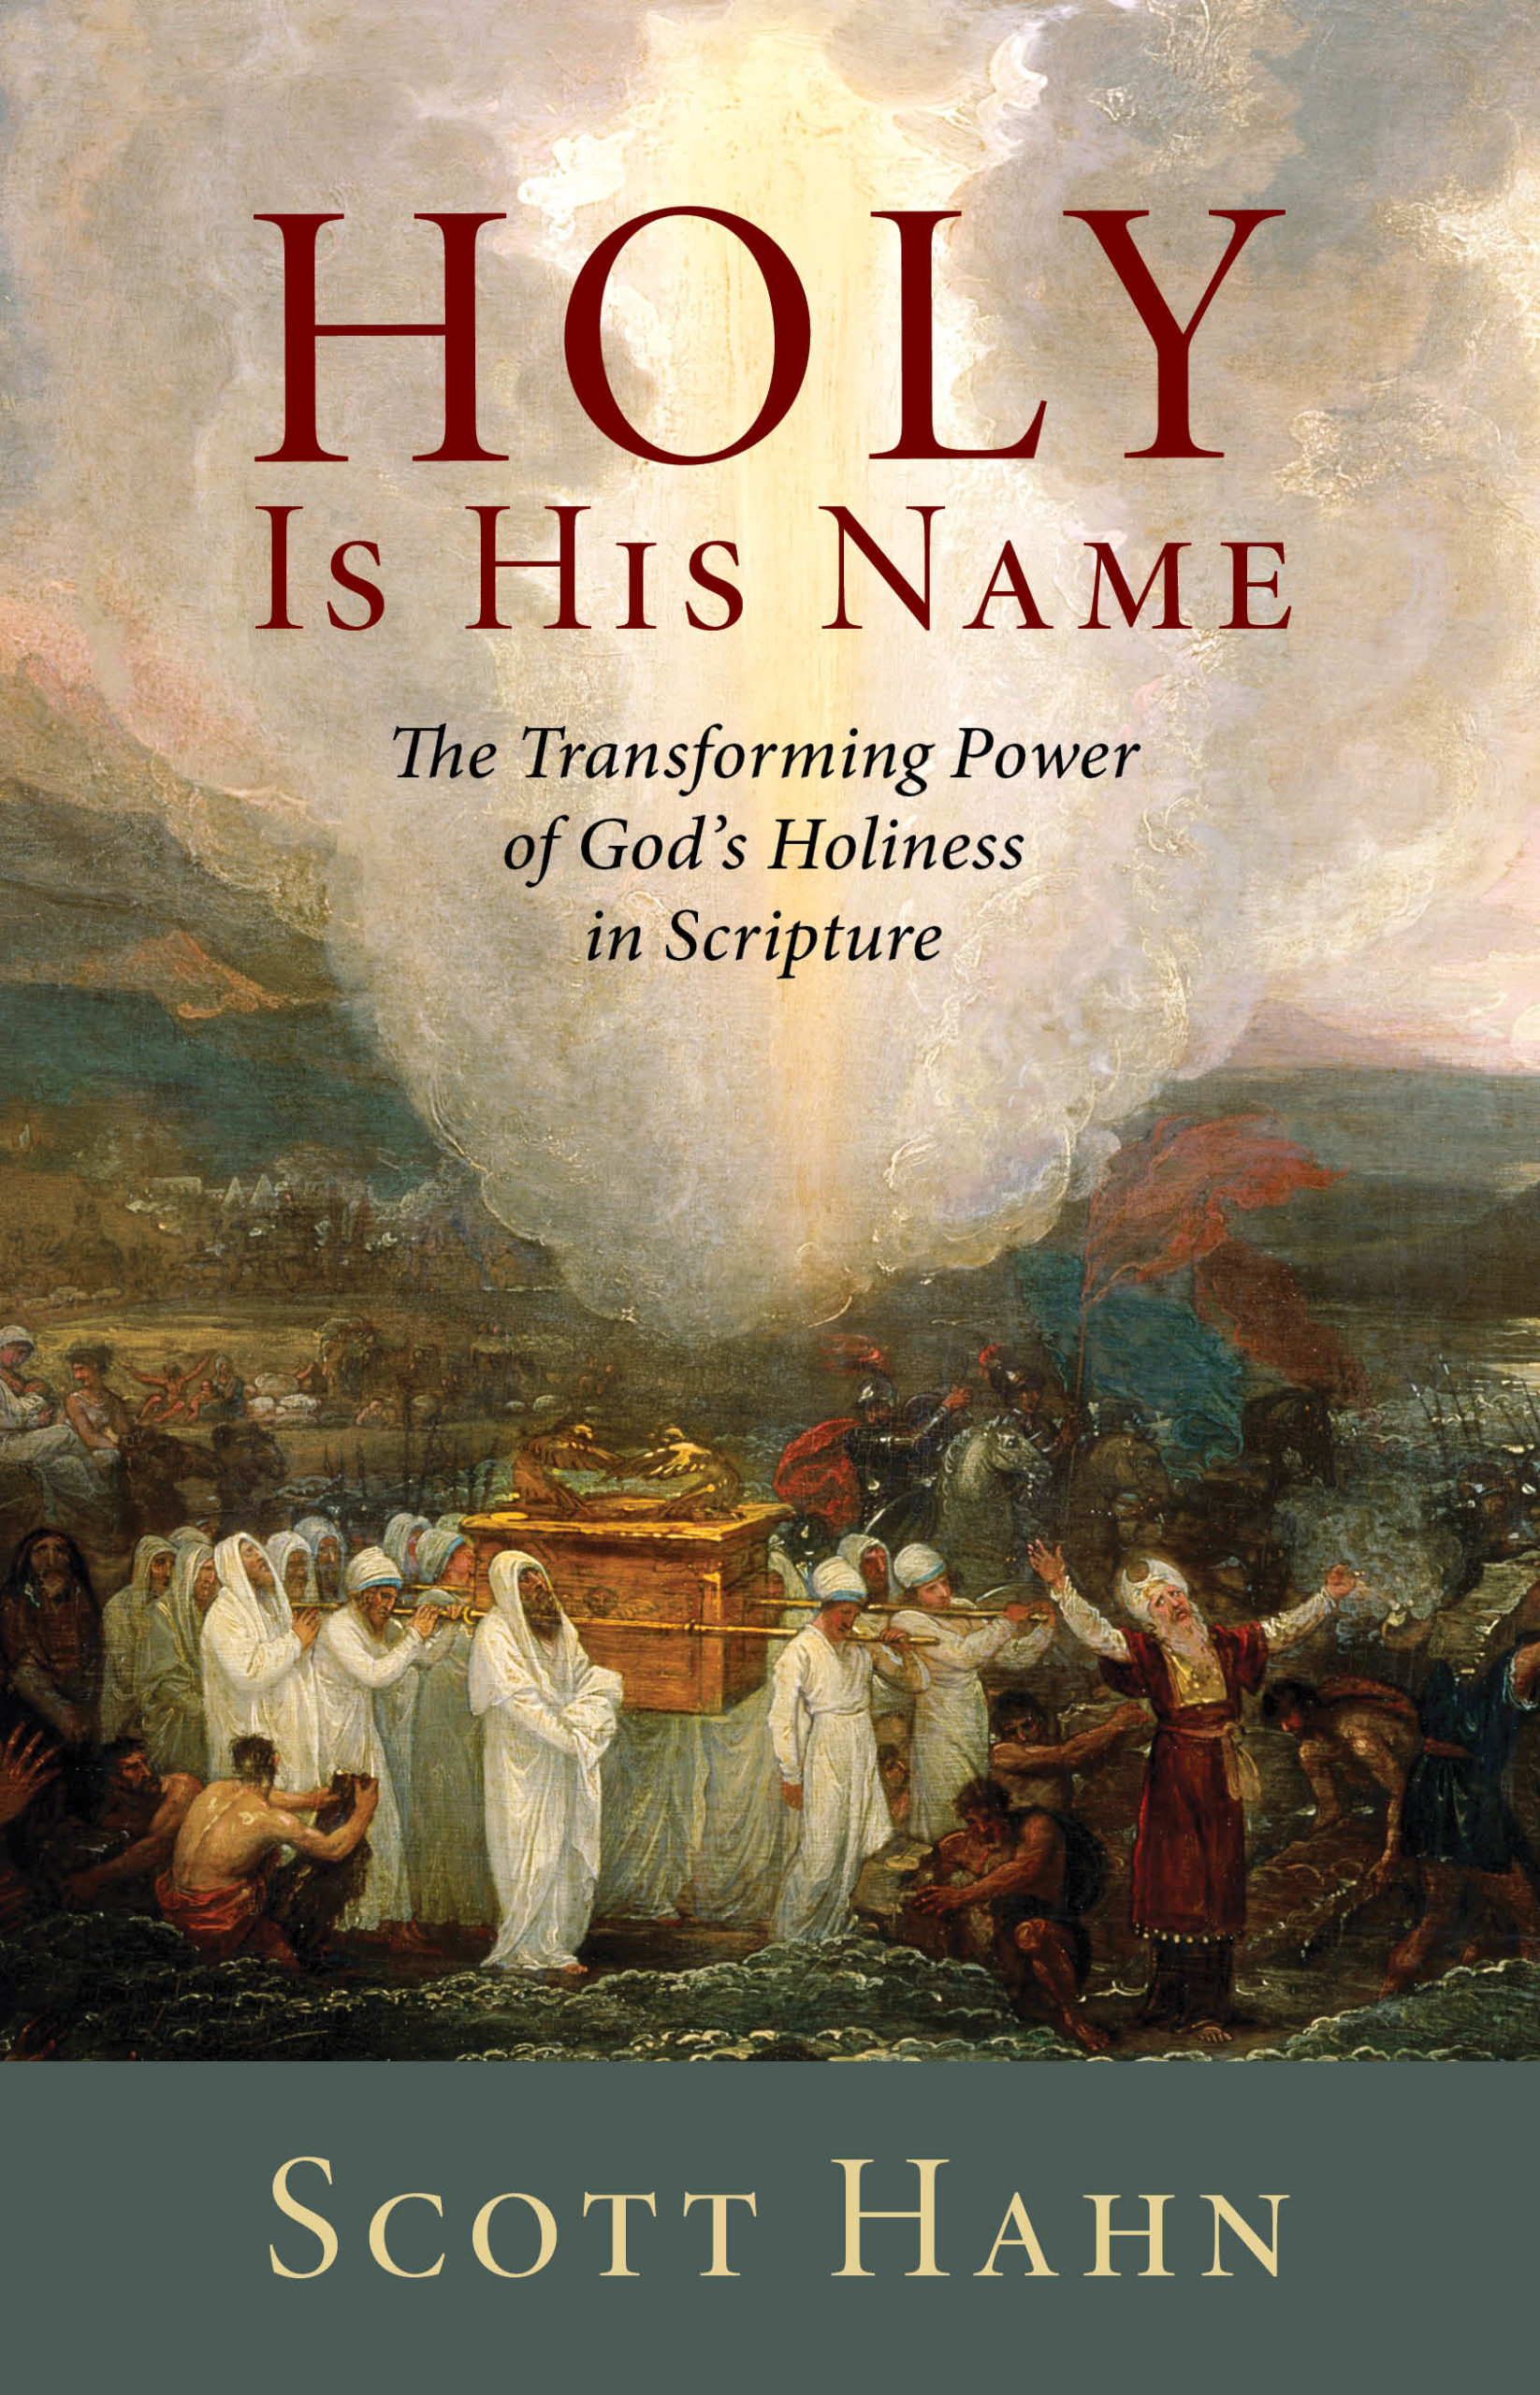 His　Power　Holy　Paul　The　Transforming　Is　God's　Holiness　Name:　Scripture　of　St.　Center　in　–